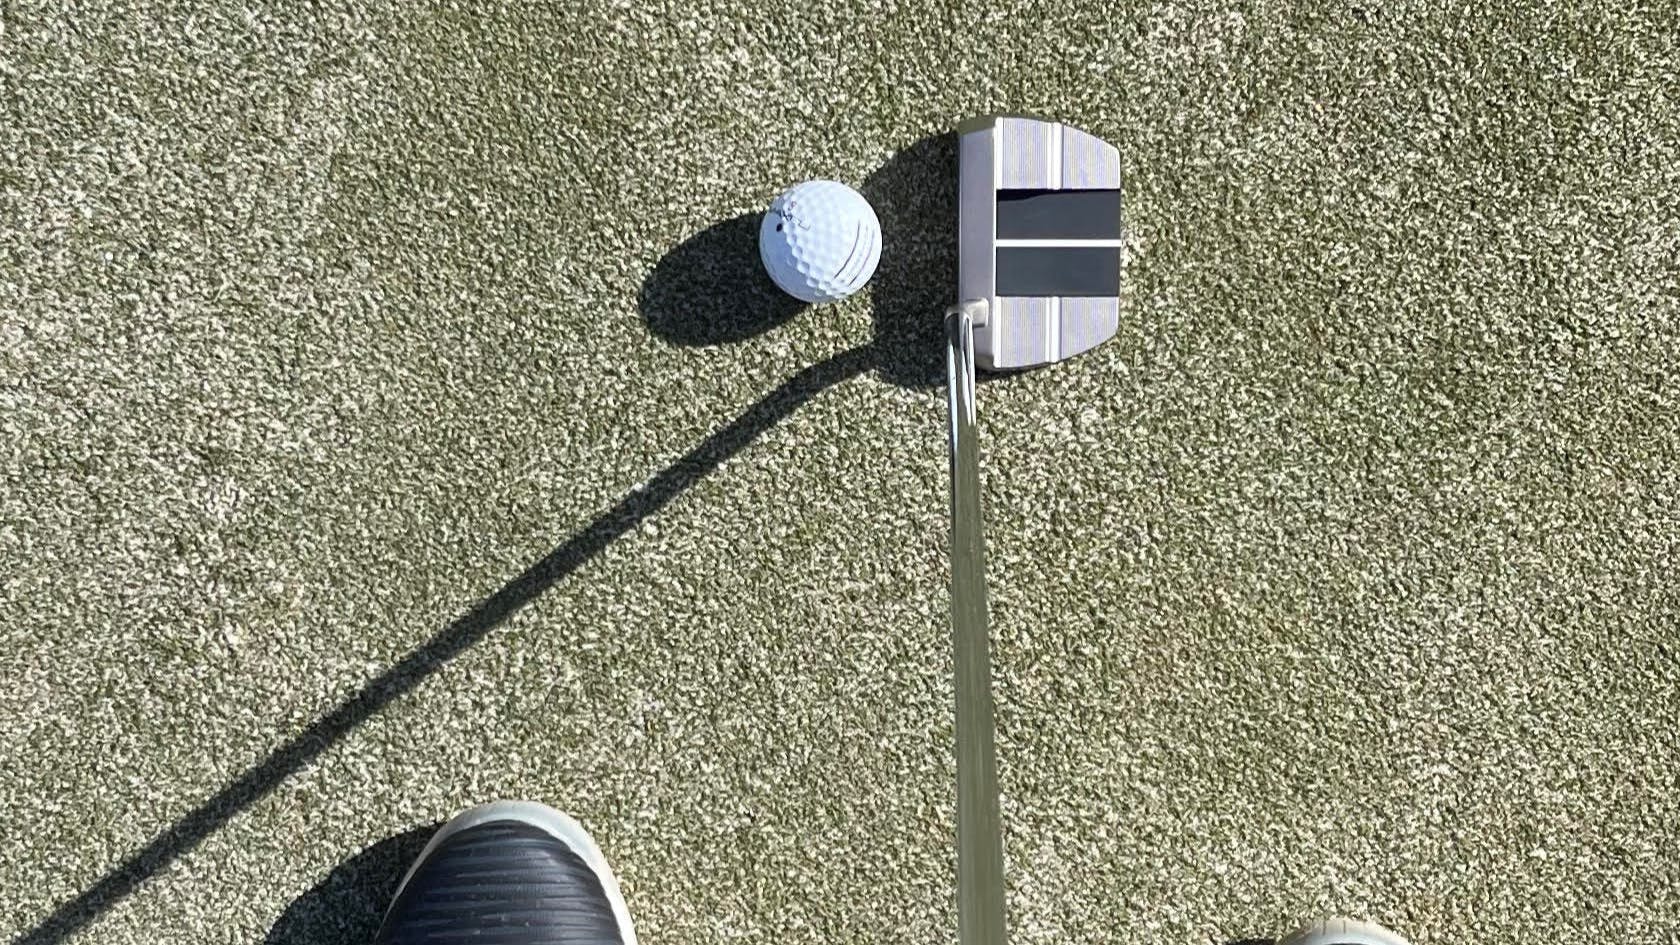 Top down view of the Cleveland HB Soft Milled #10.5 Slant Neck Putter.